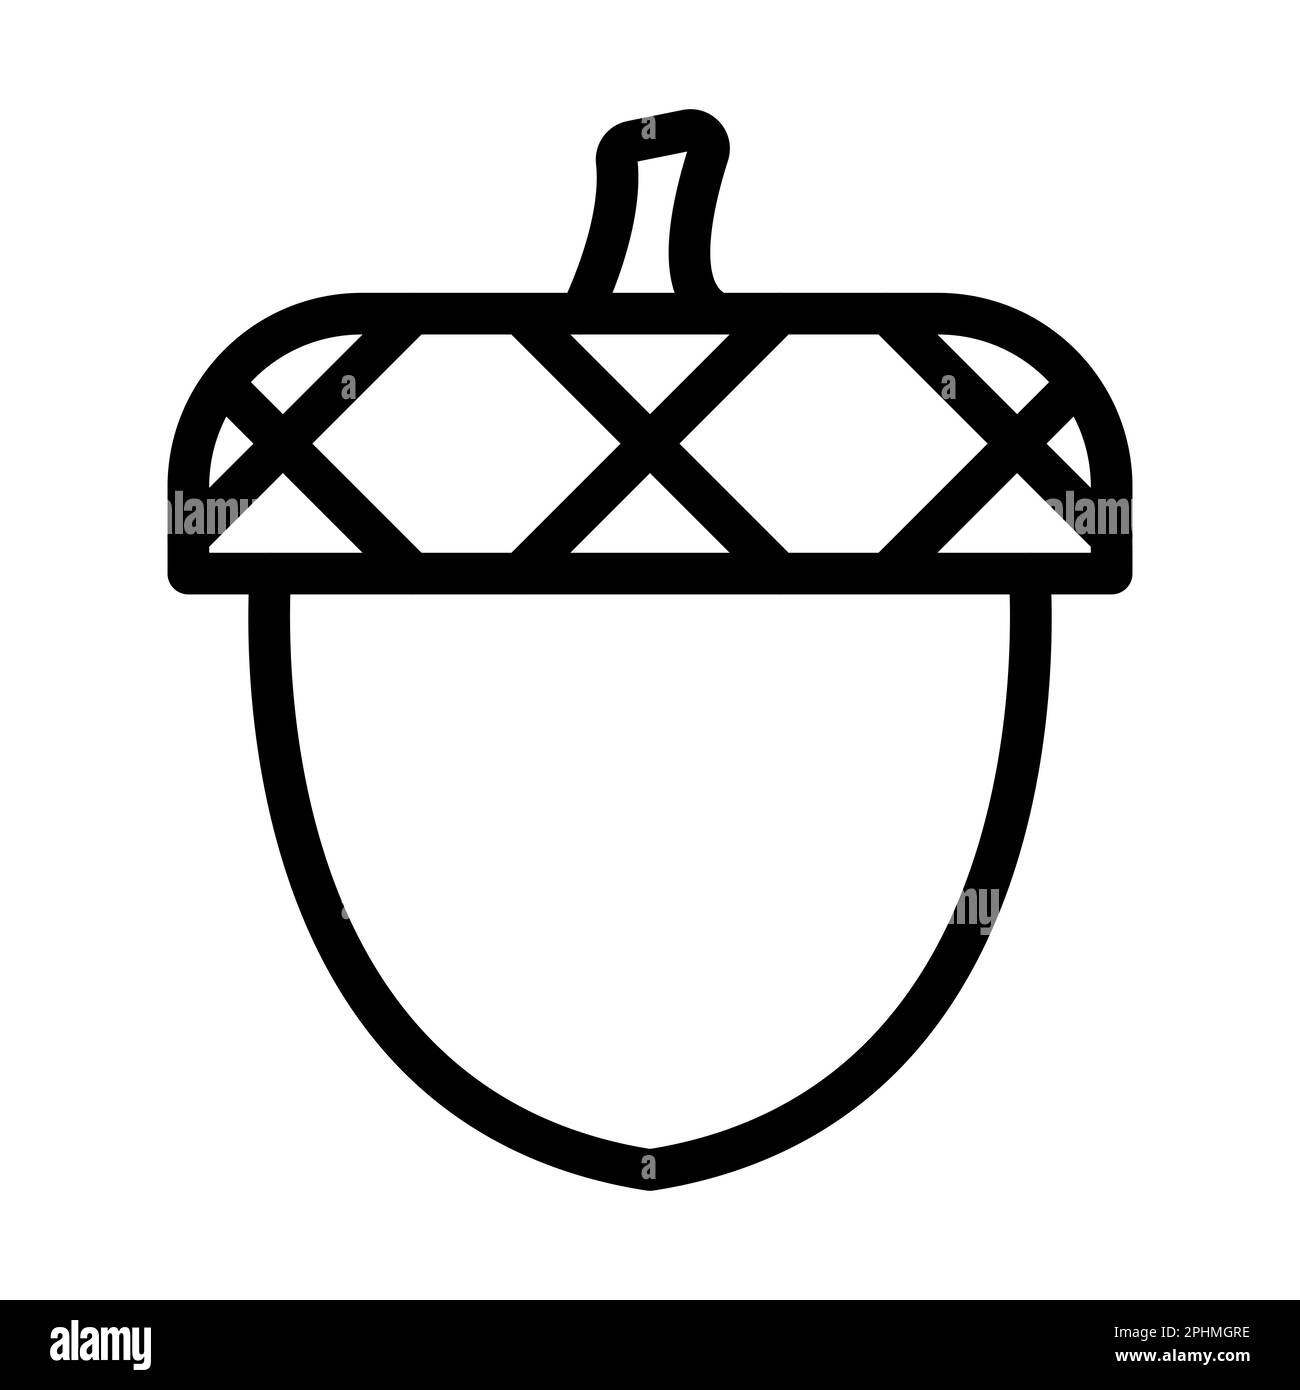 Acorn Vector Thick Line Icon For Personal And Commercial Use. Stock Photo